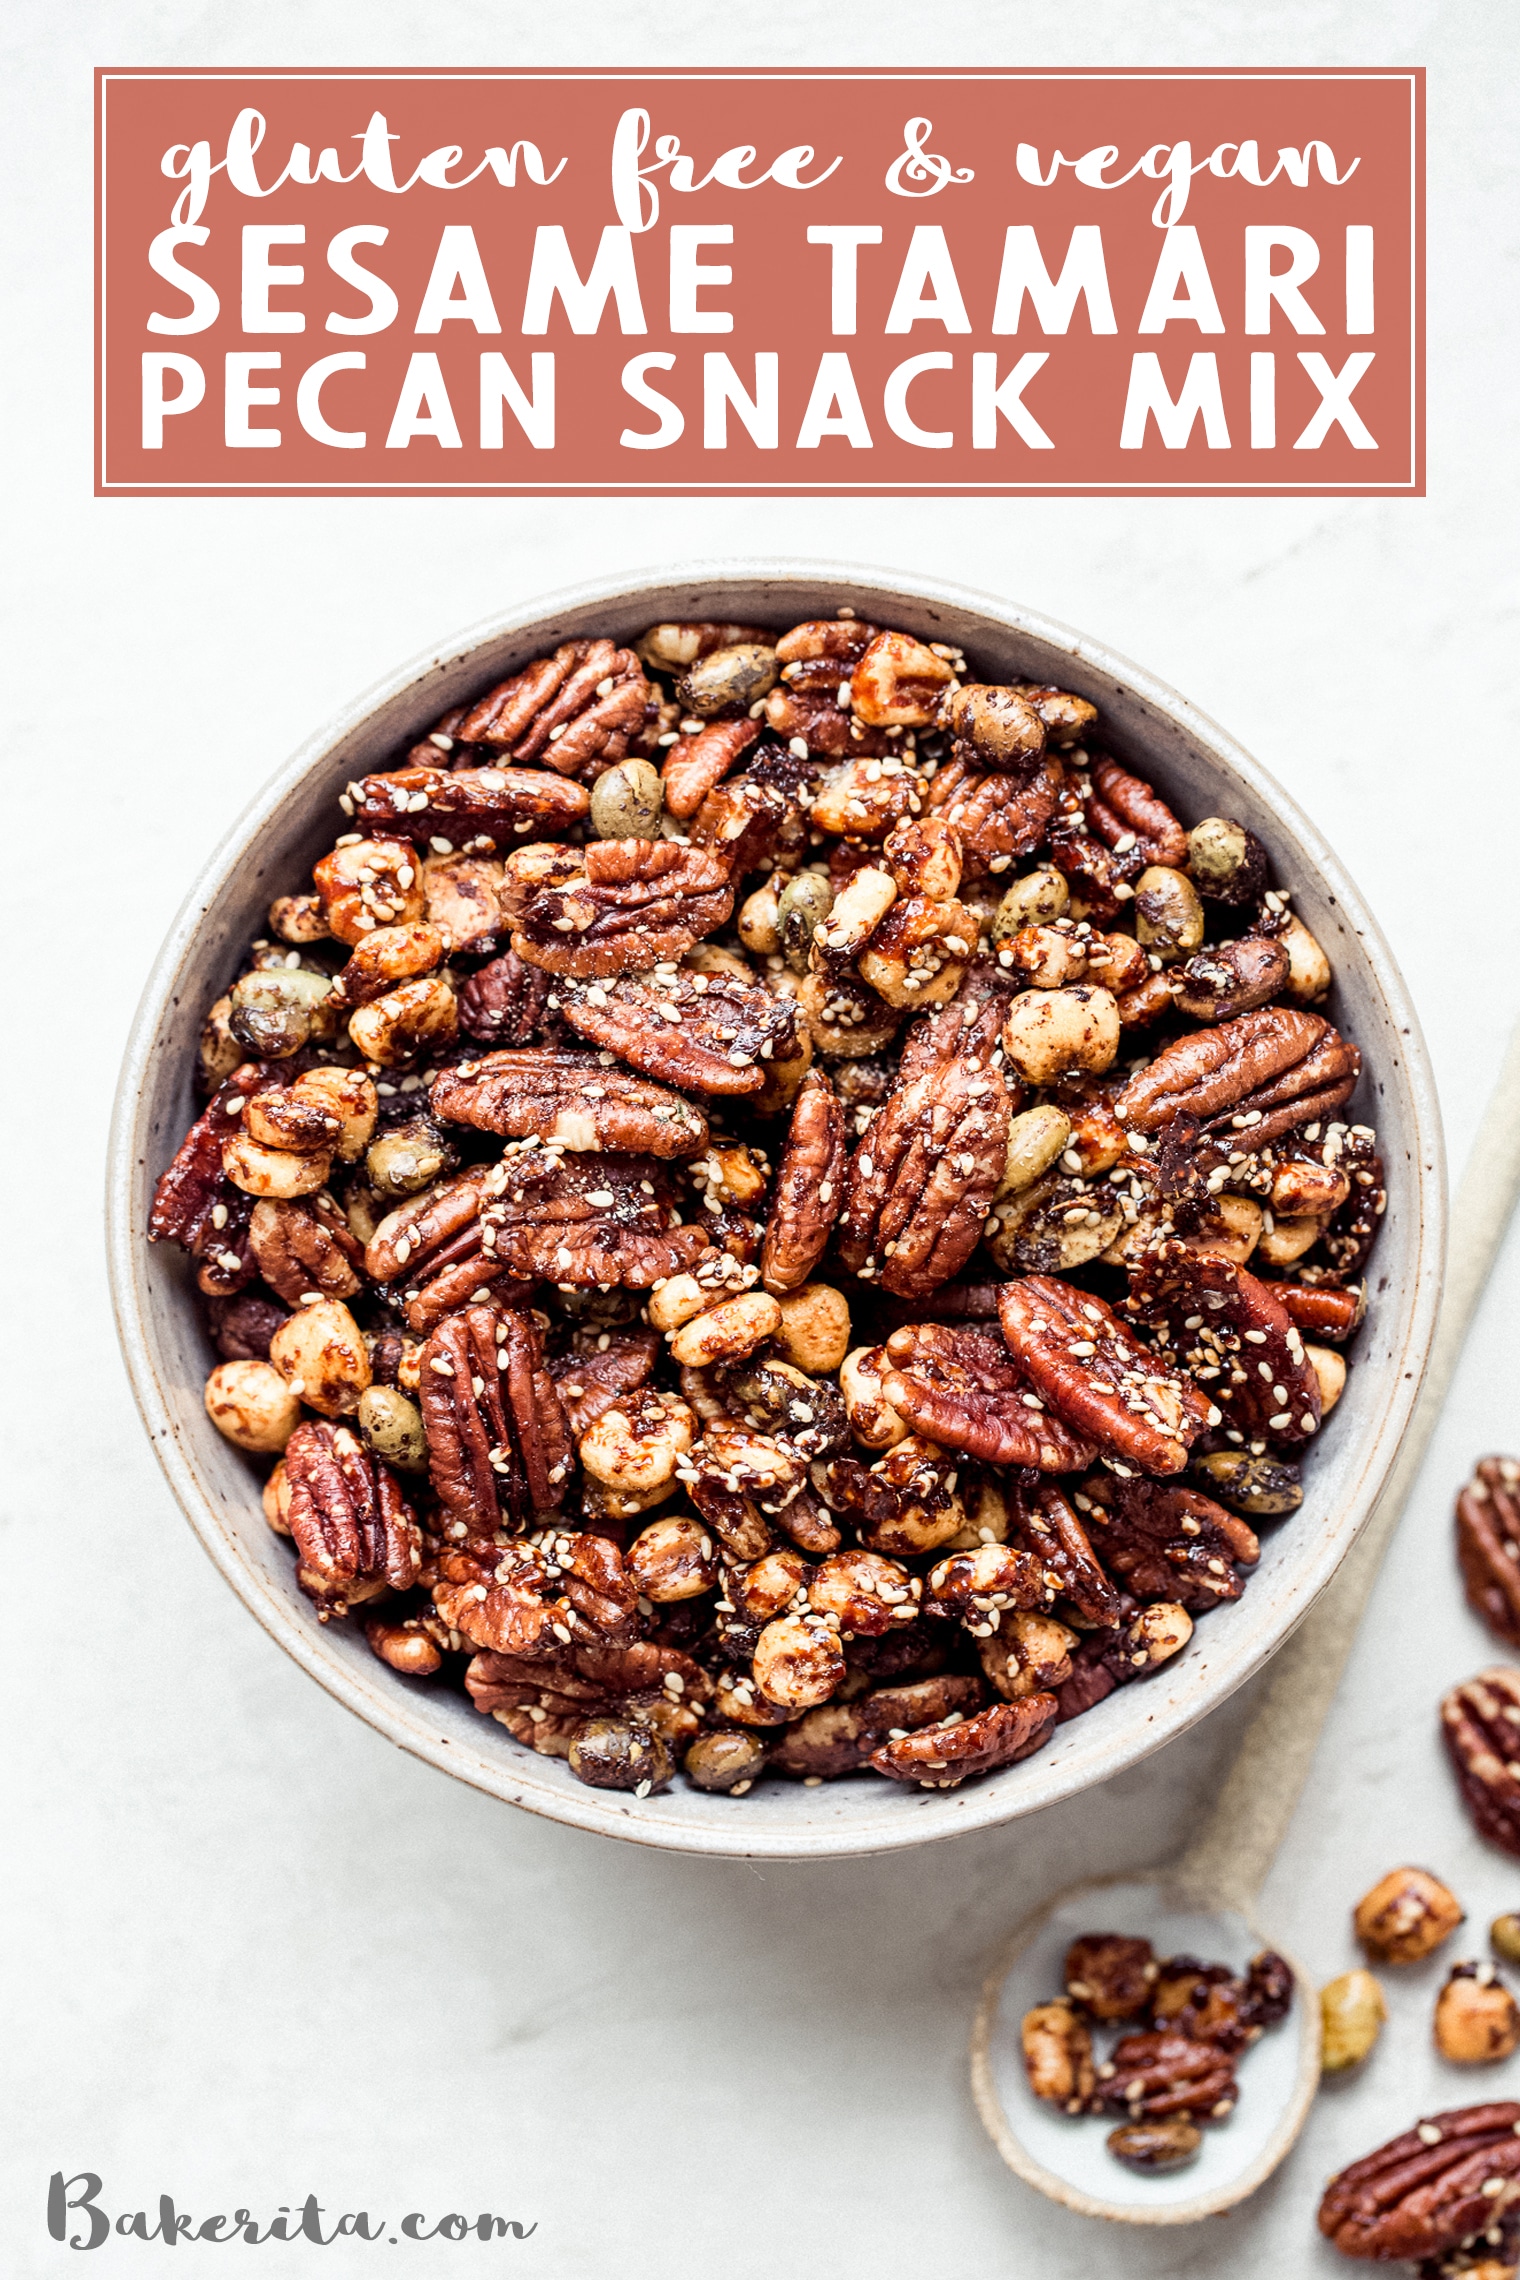 This Sesame Tamari Pecan Snack Mix is a deliciously crunchy snack that's bursting with sweet, savory, and umami flavors. It's an easy-to-make, gluten-free and vegan recipe!